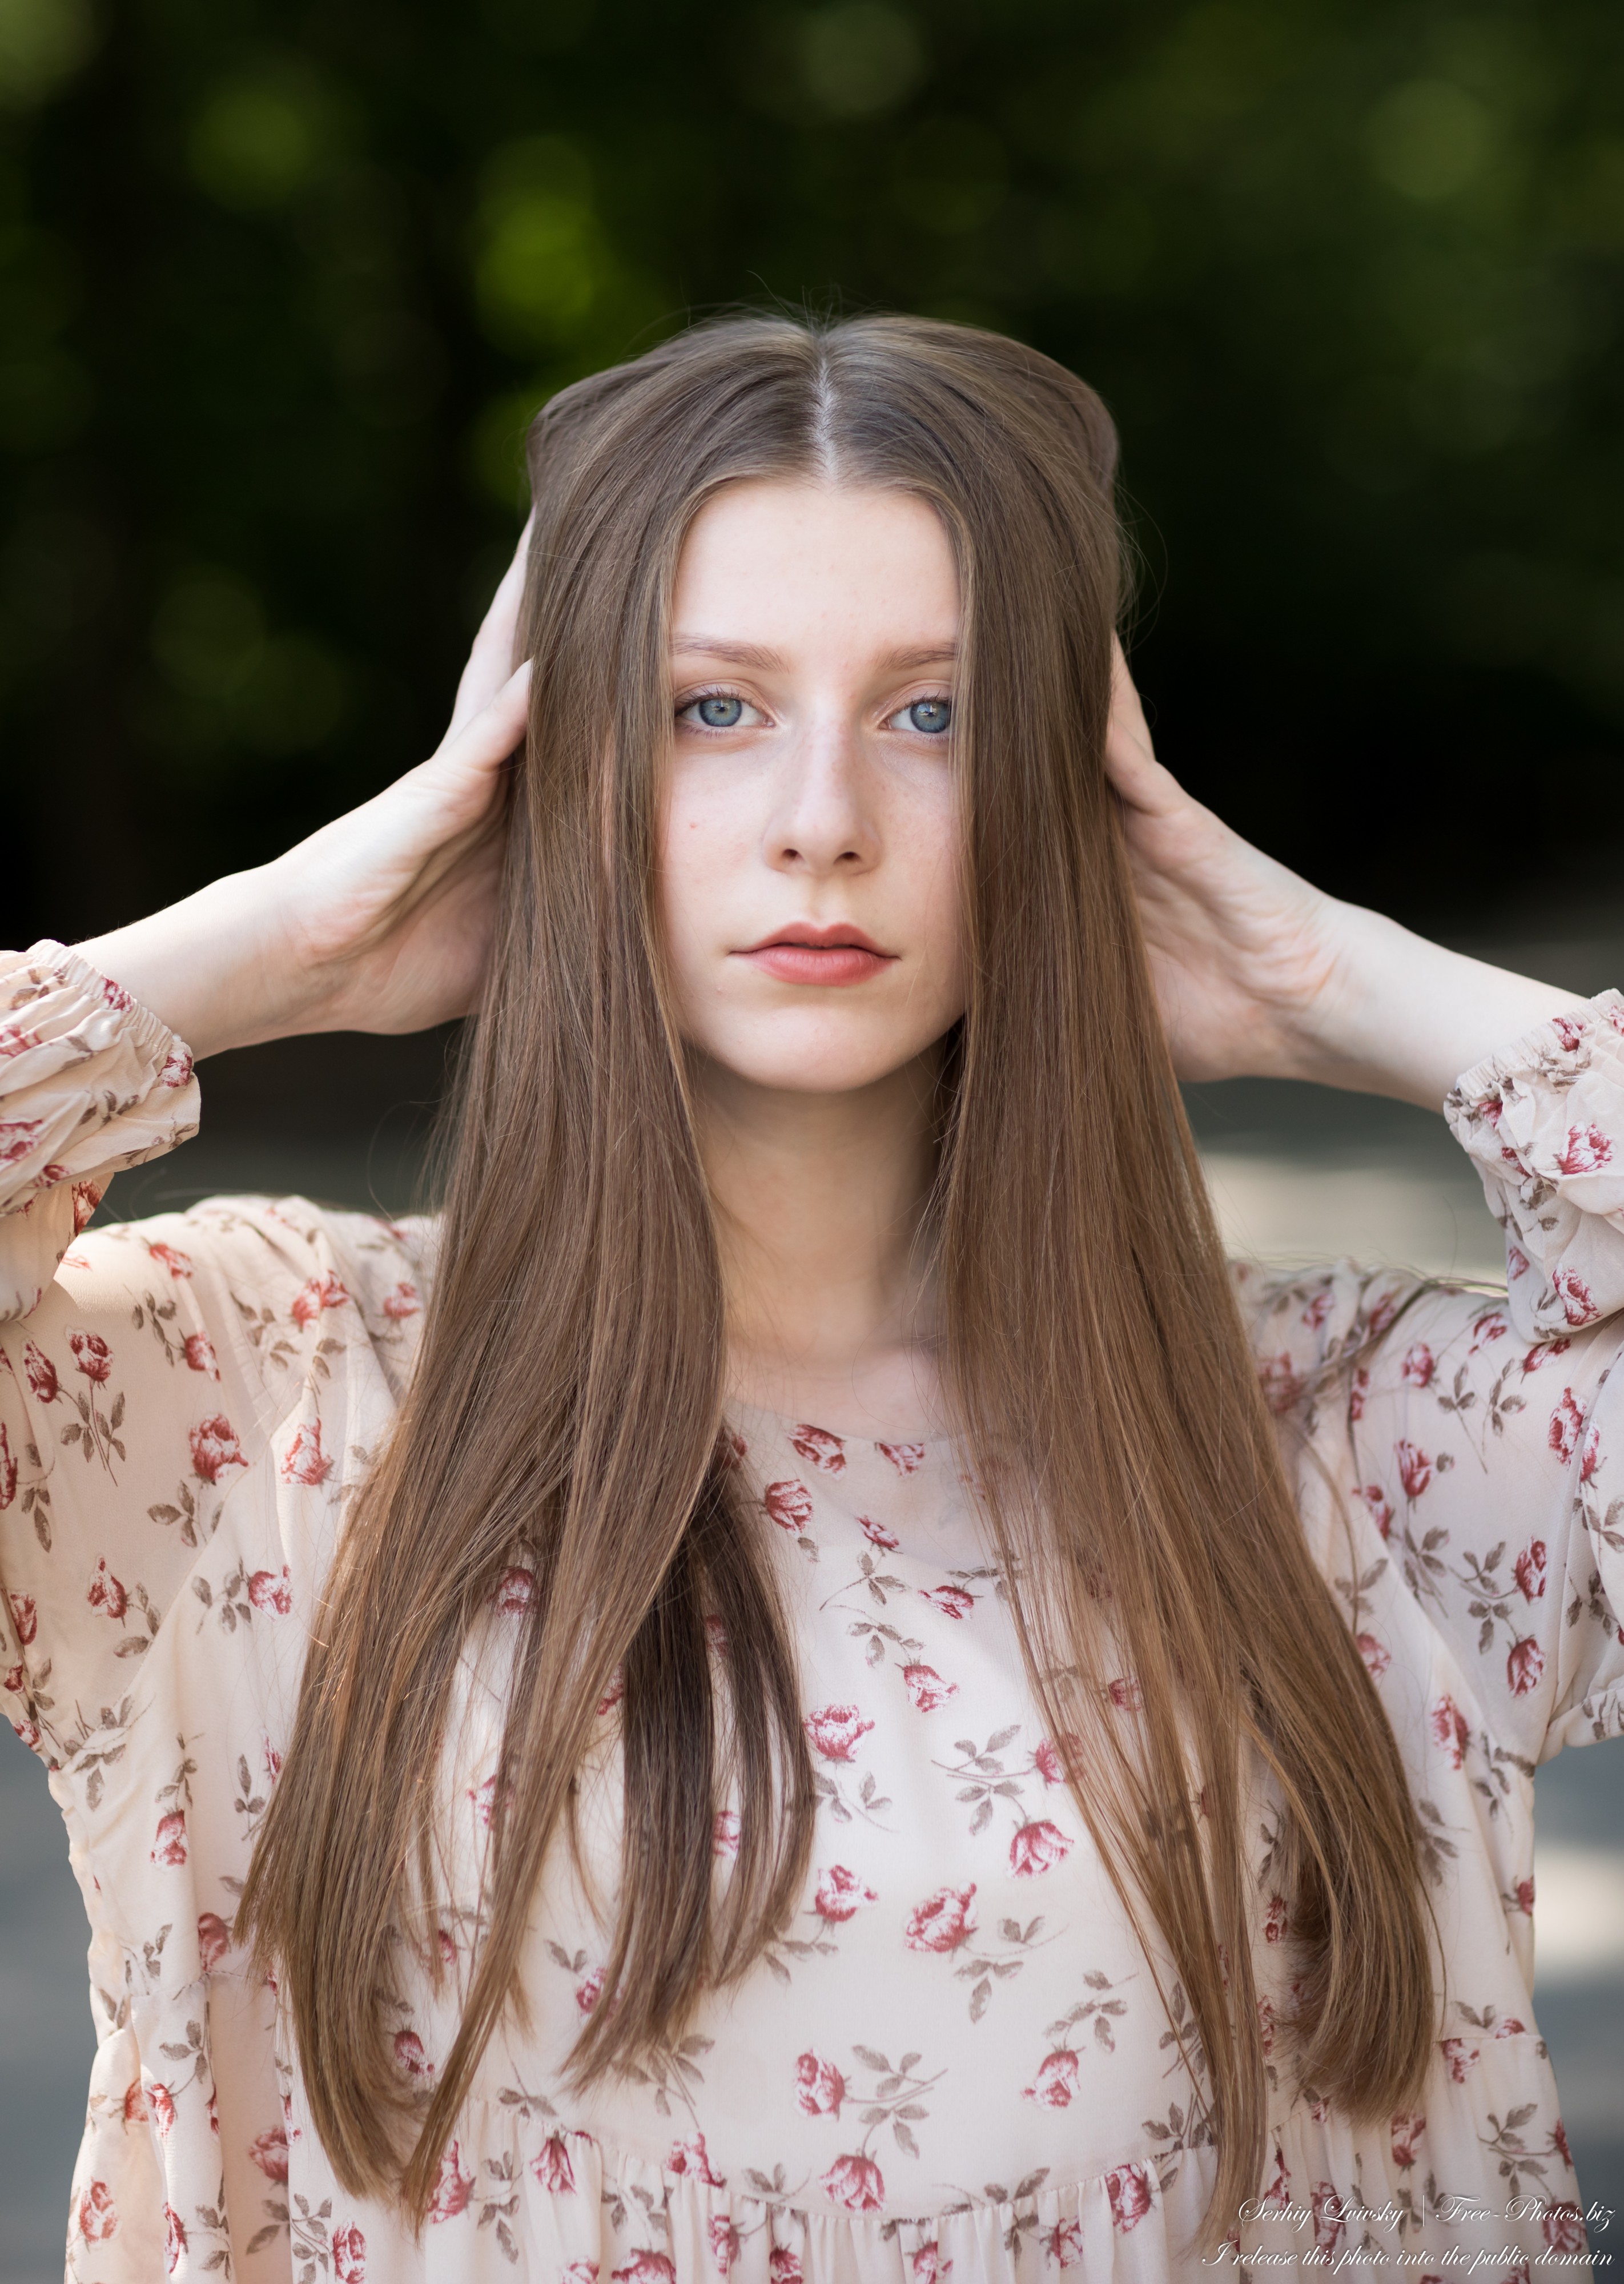 Inna - an 18-year-old natural fair-haired girl photographed in July 2020 by Serhiy Lvivsky, picture 13